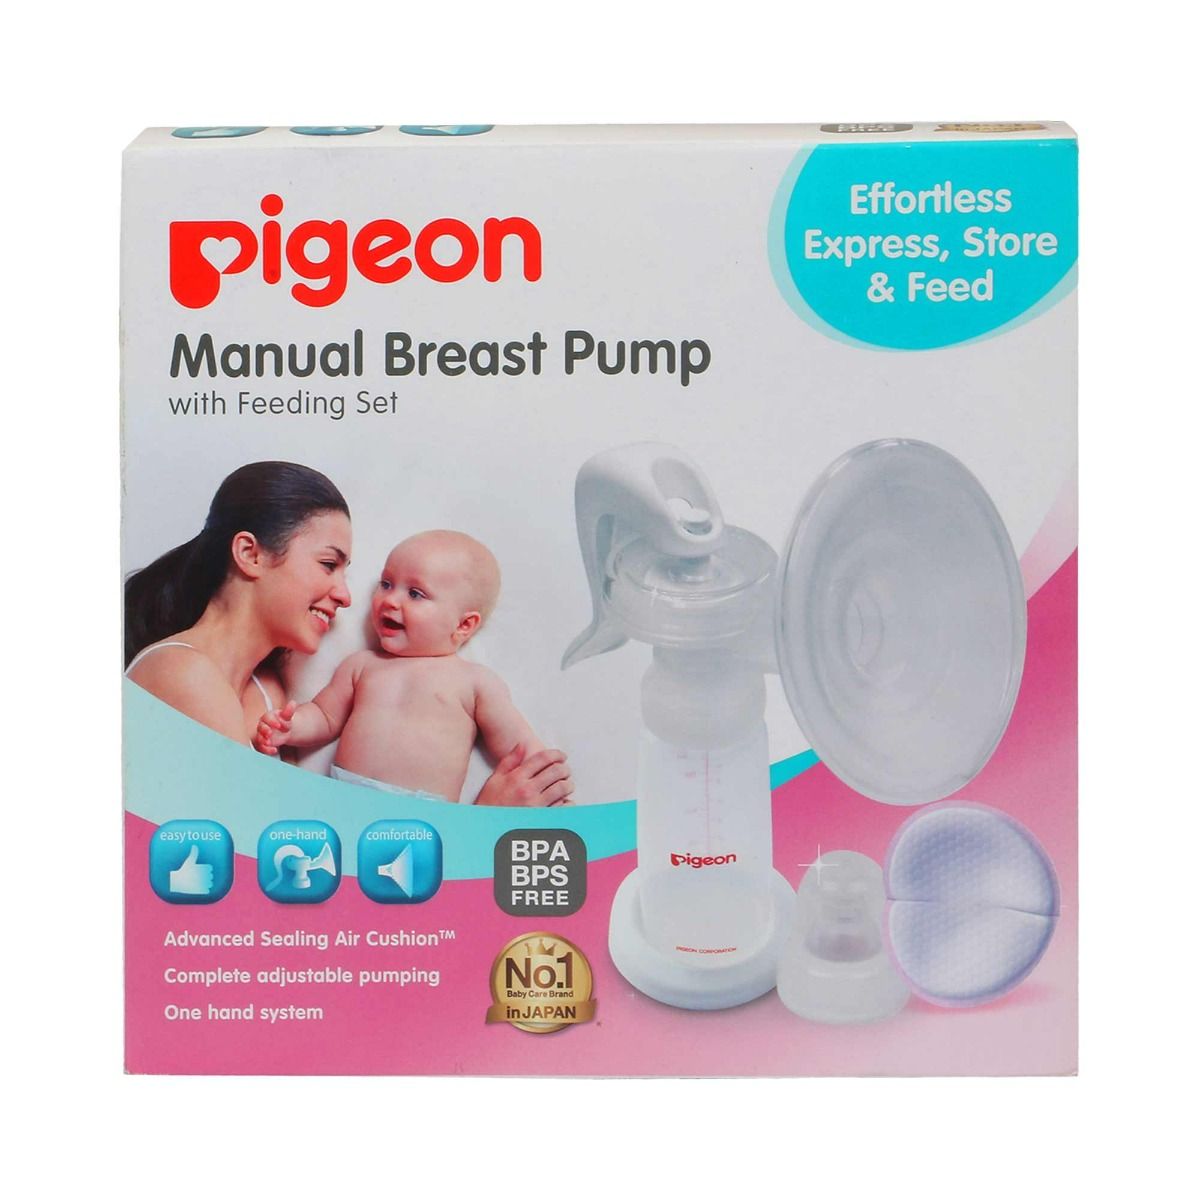 Buy Pigeon Manual Breast Pump with Feeding Set, 1 Count Online